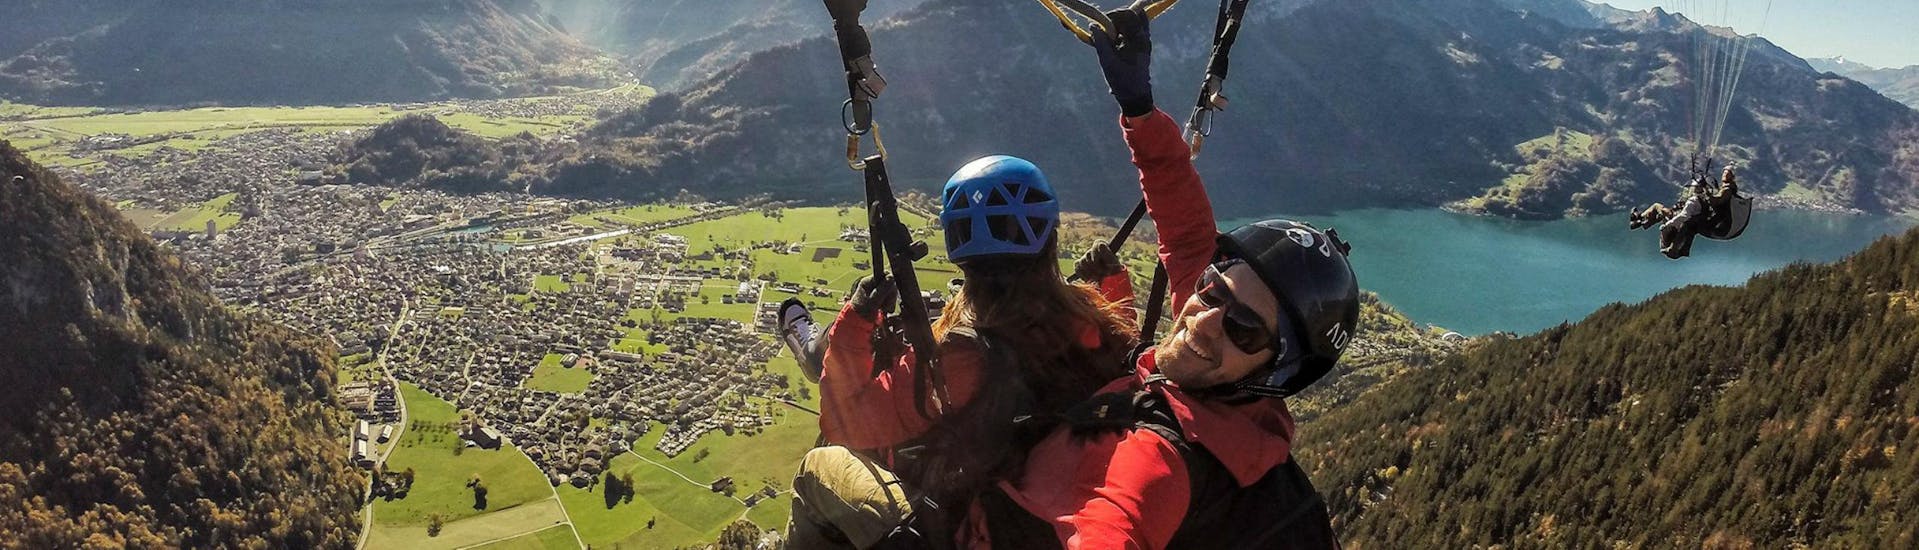 A tandem pilot from Skywings Interlaken is taking a selfie while his passenger enjoys the panoramic view of the Swiss mountains during their paragliding flight.